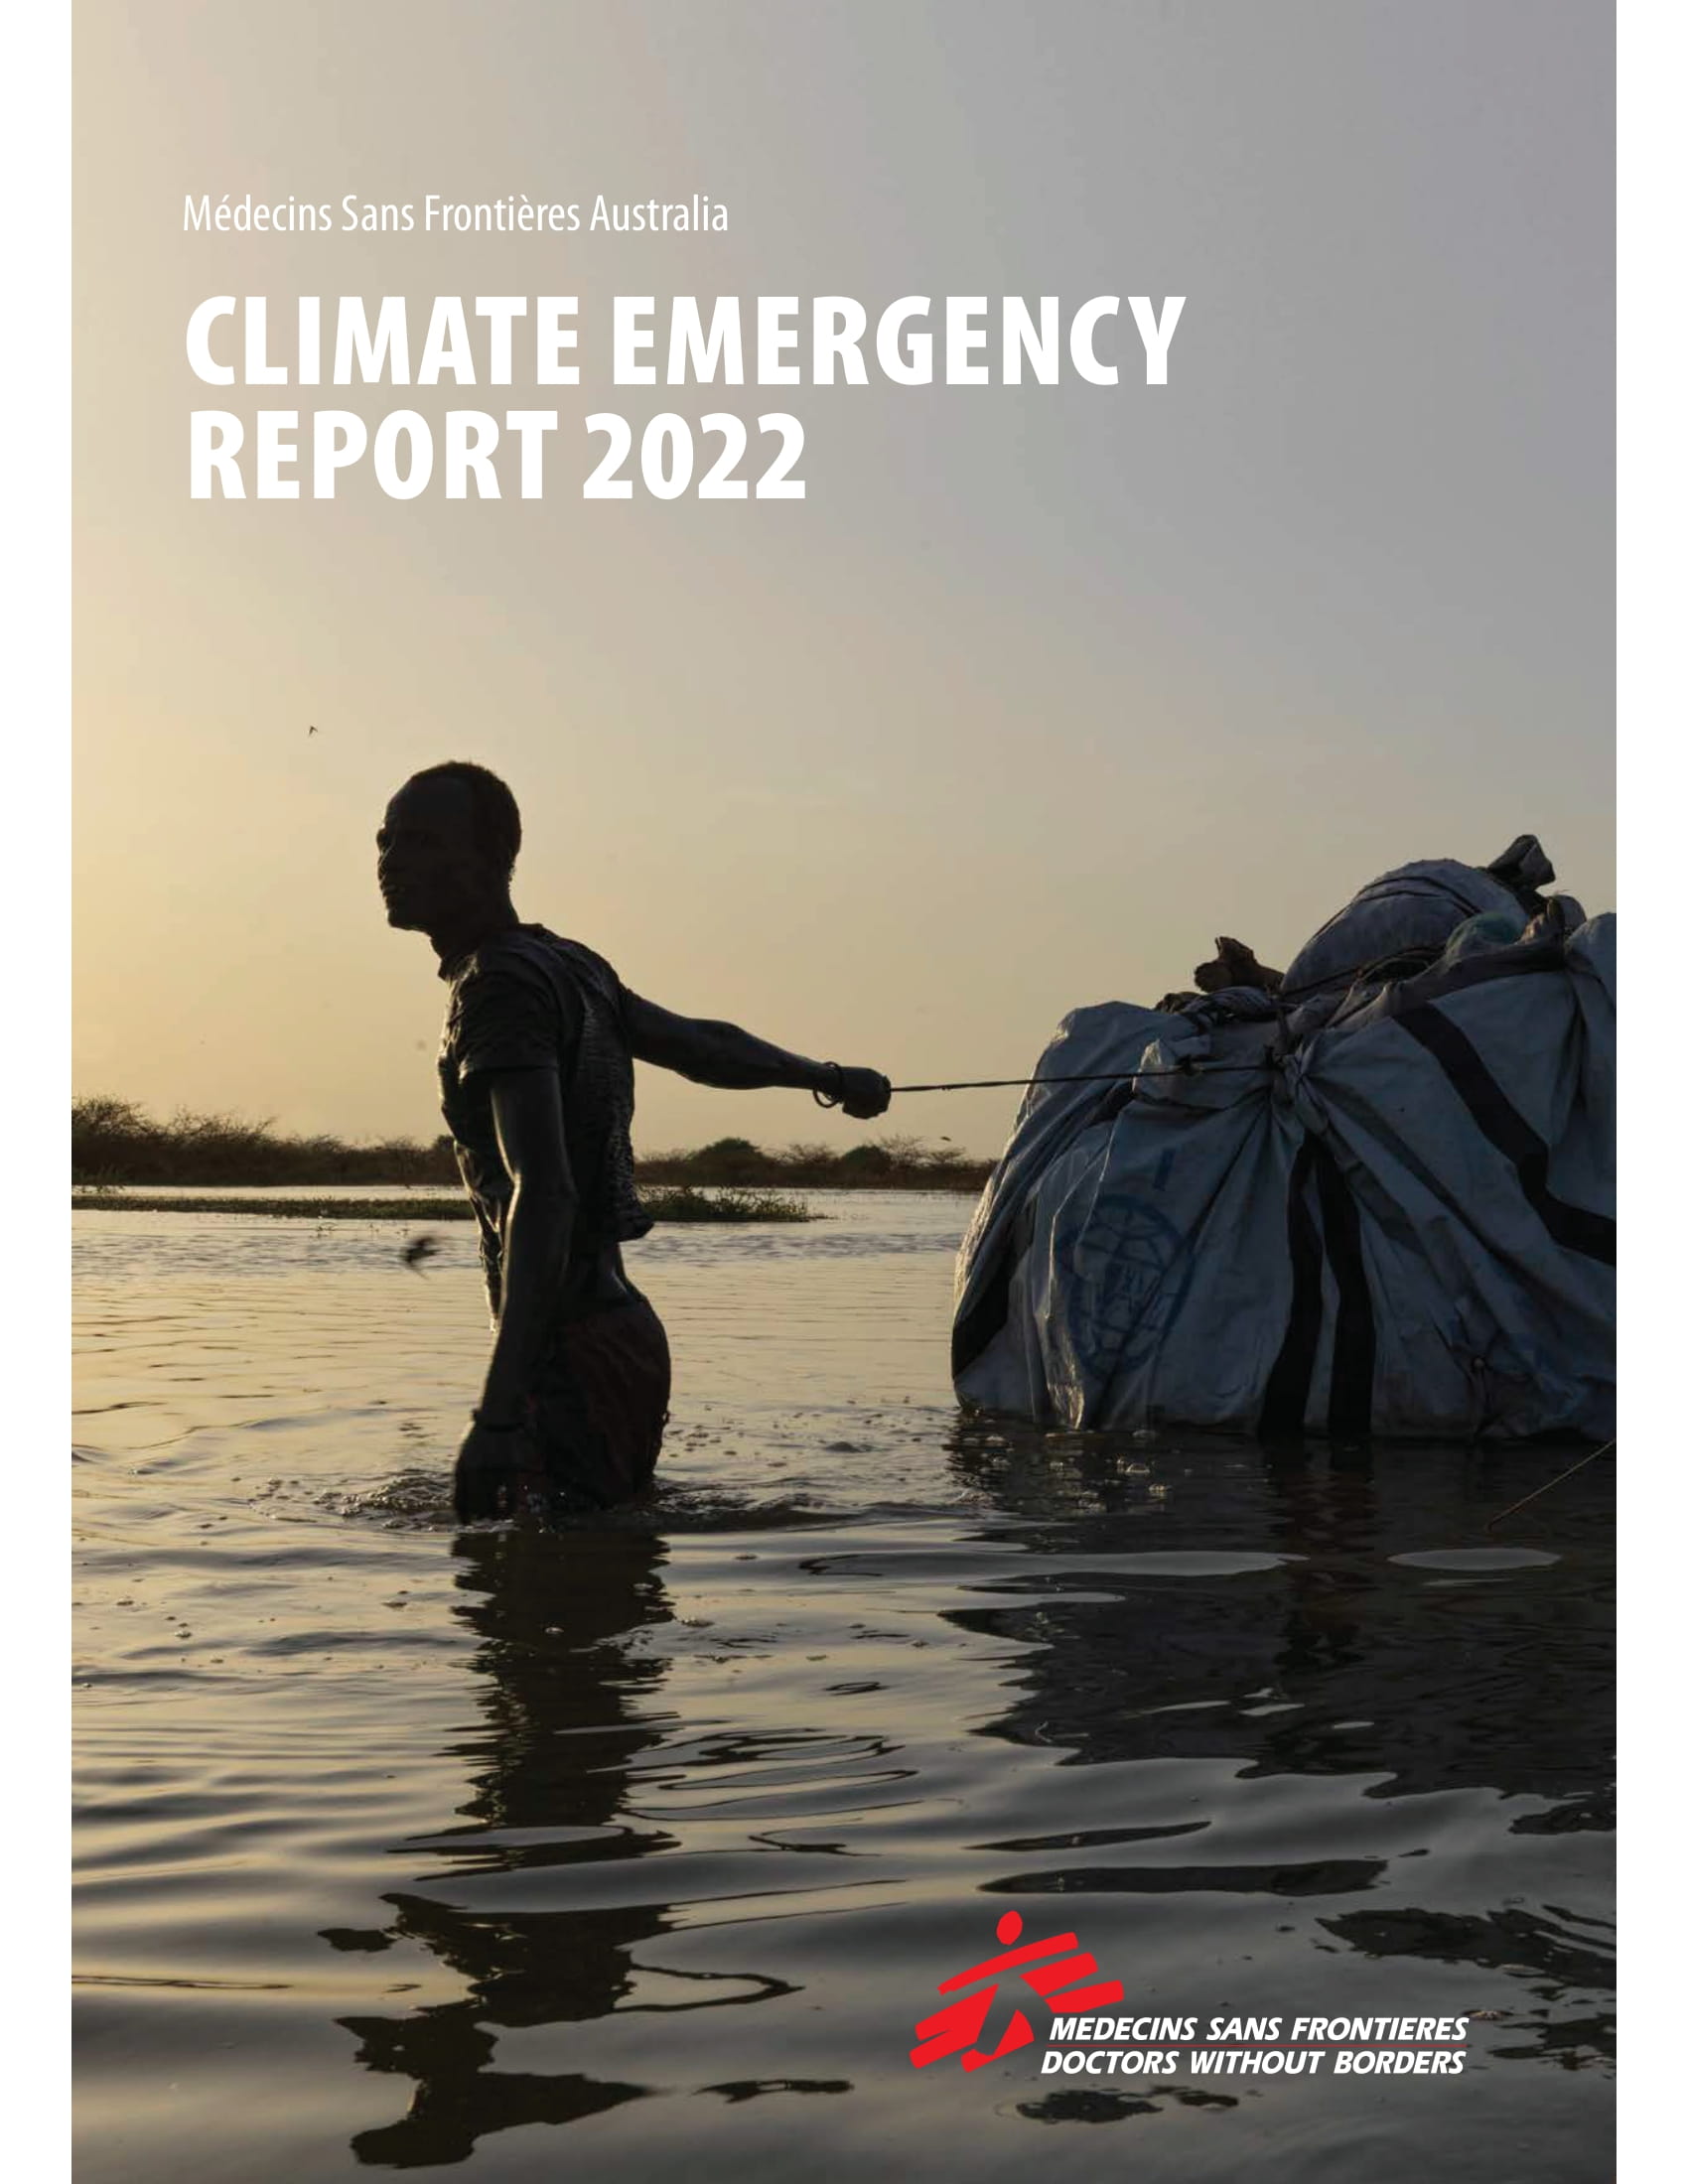 msf_climate_report_2022_cover-1.jpg